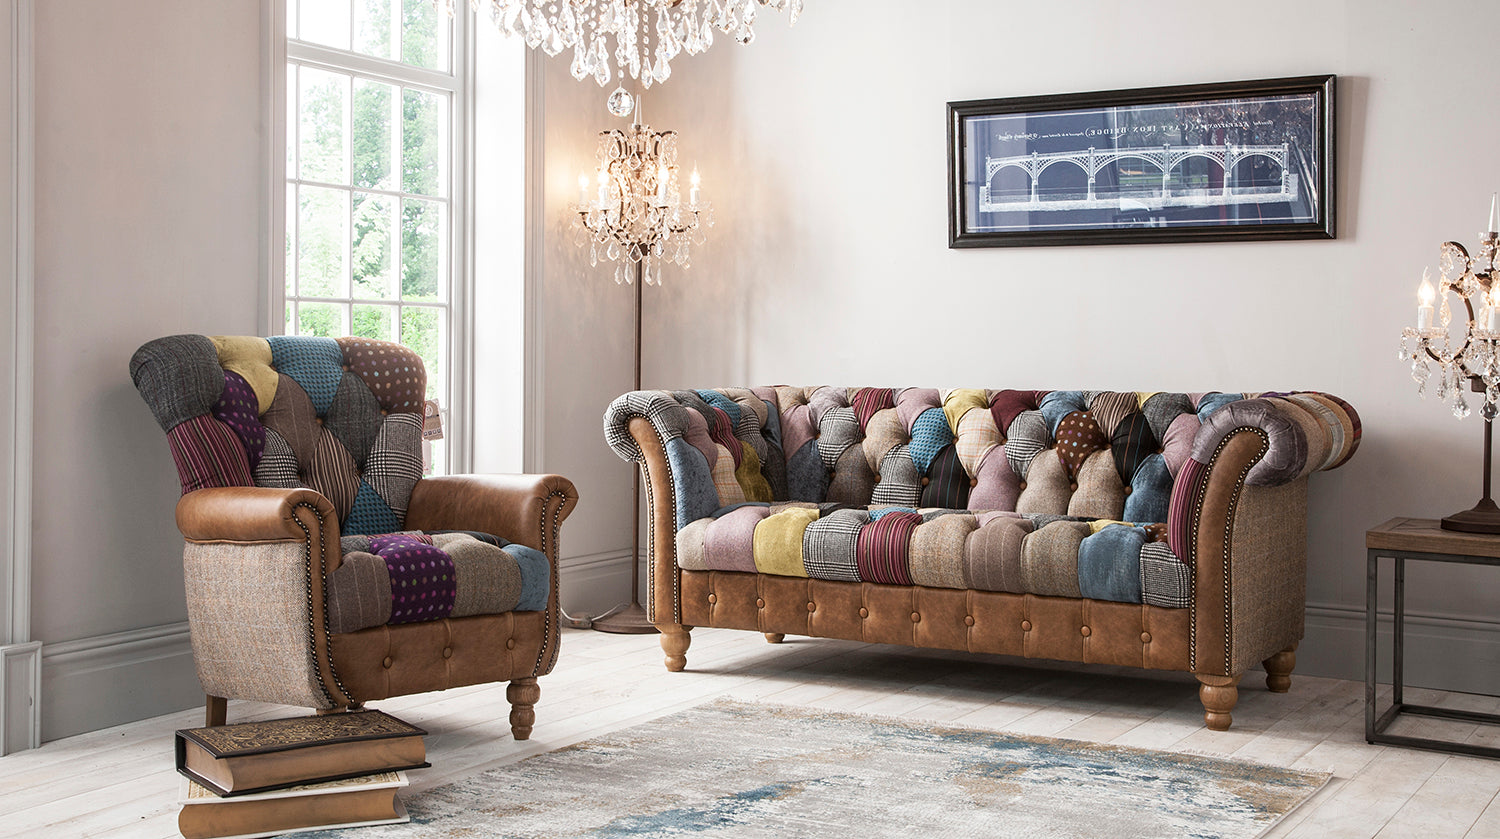 Harlequin 3 seater and 4 seater sofas from Top Secret Furniture